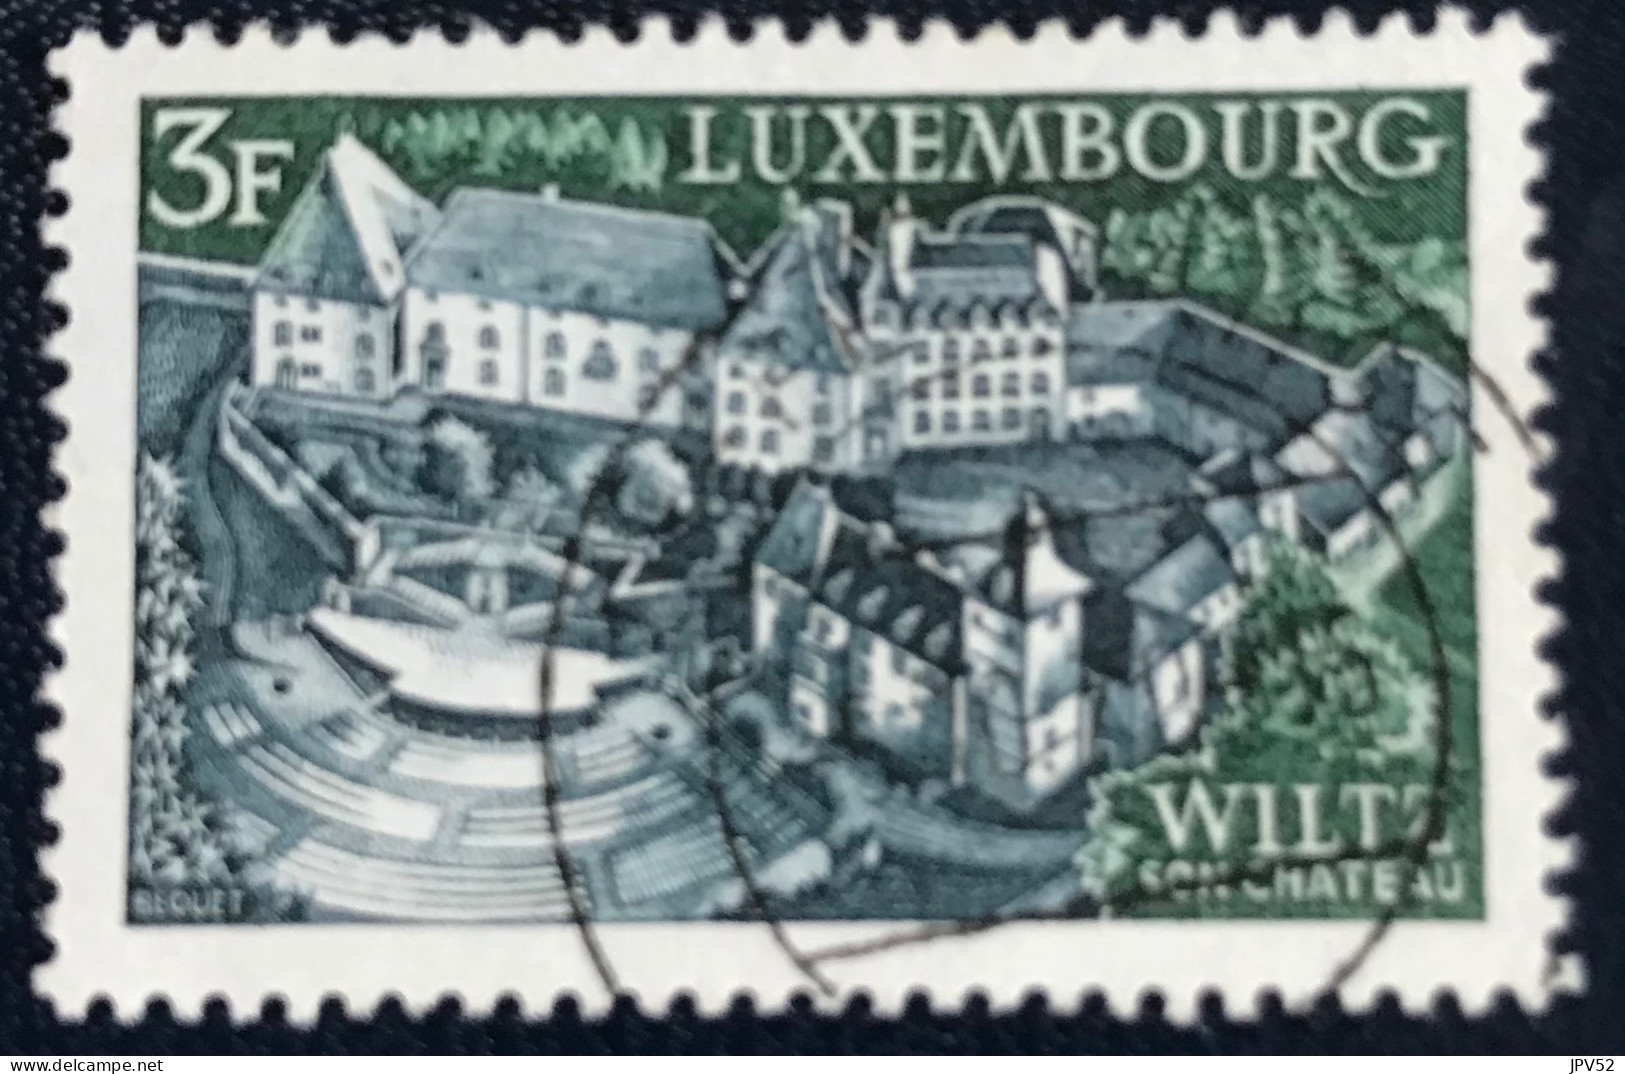 Luxembourg - Luxemburg - C18/33 - 1969 - (°)used - Michel 797 - Wiltz - Used Stamps